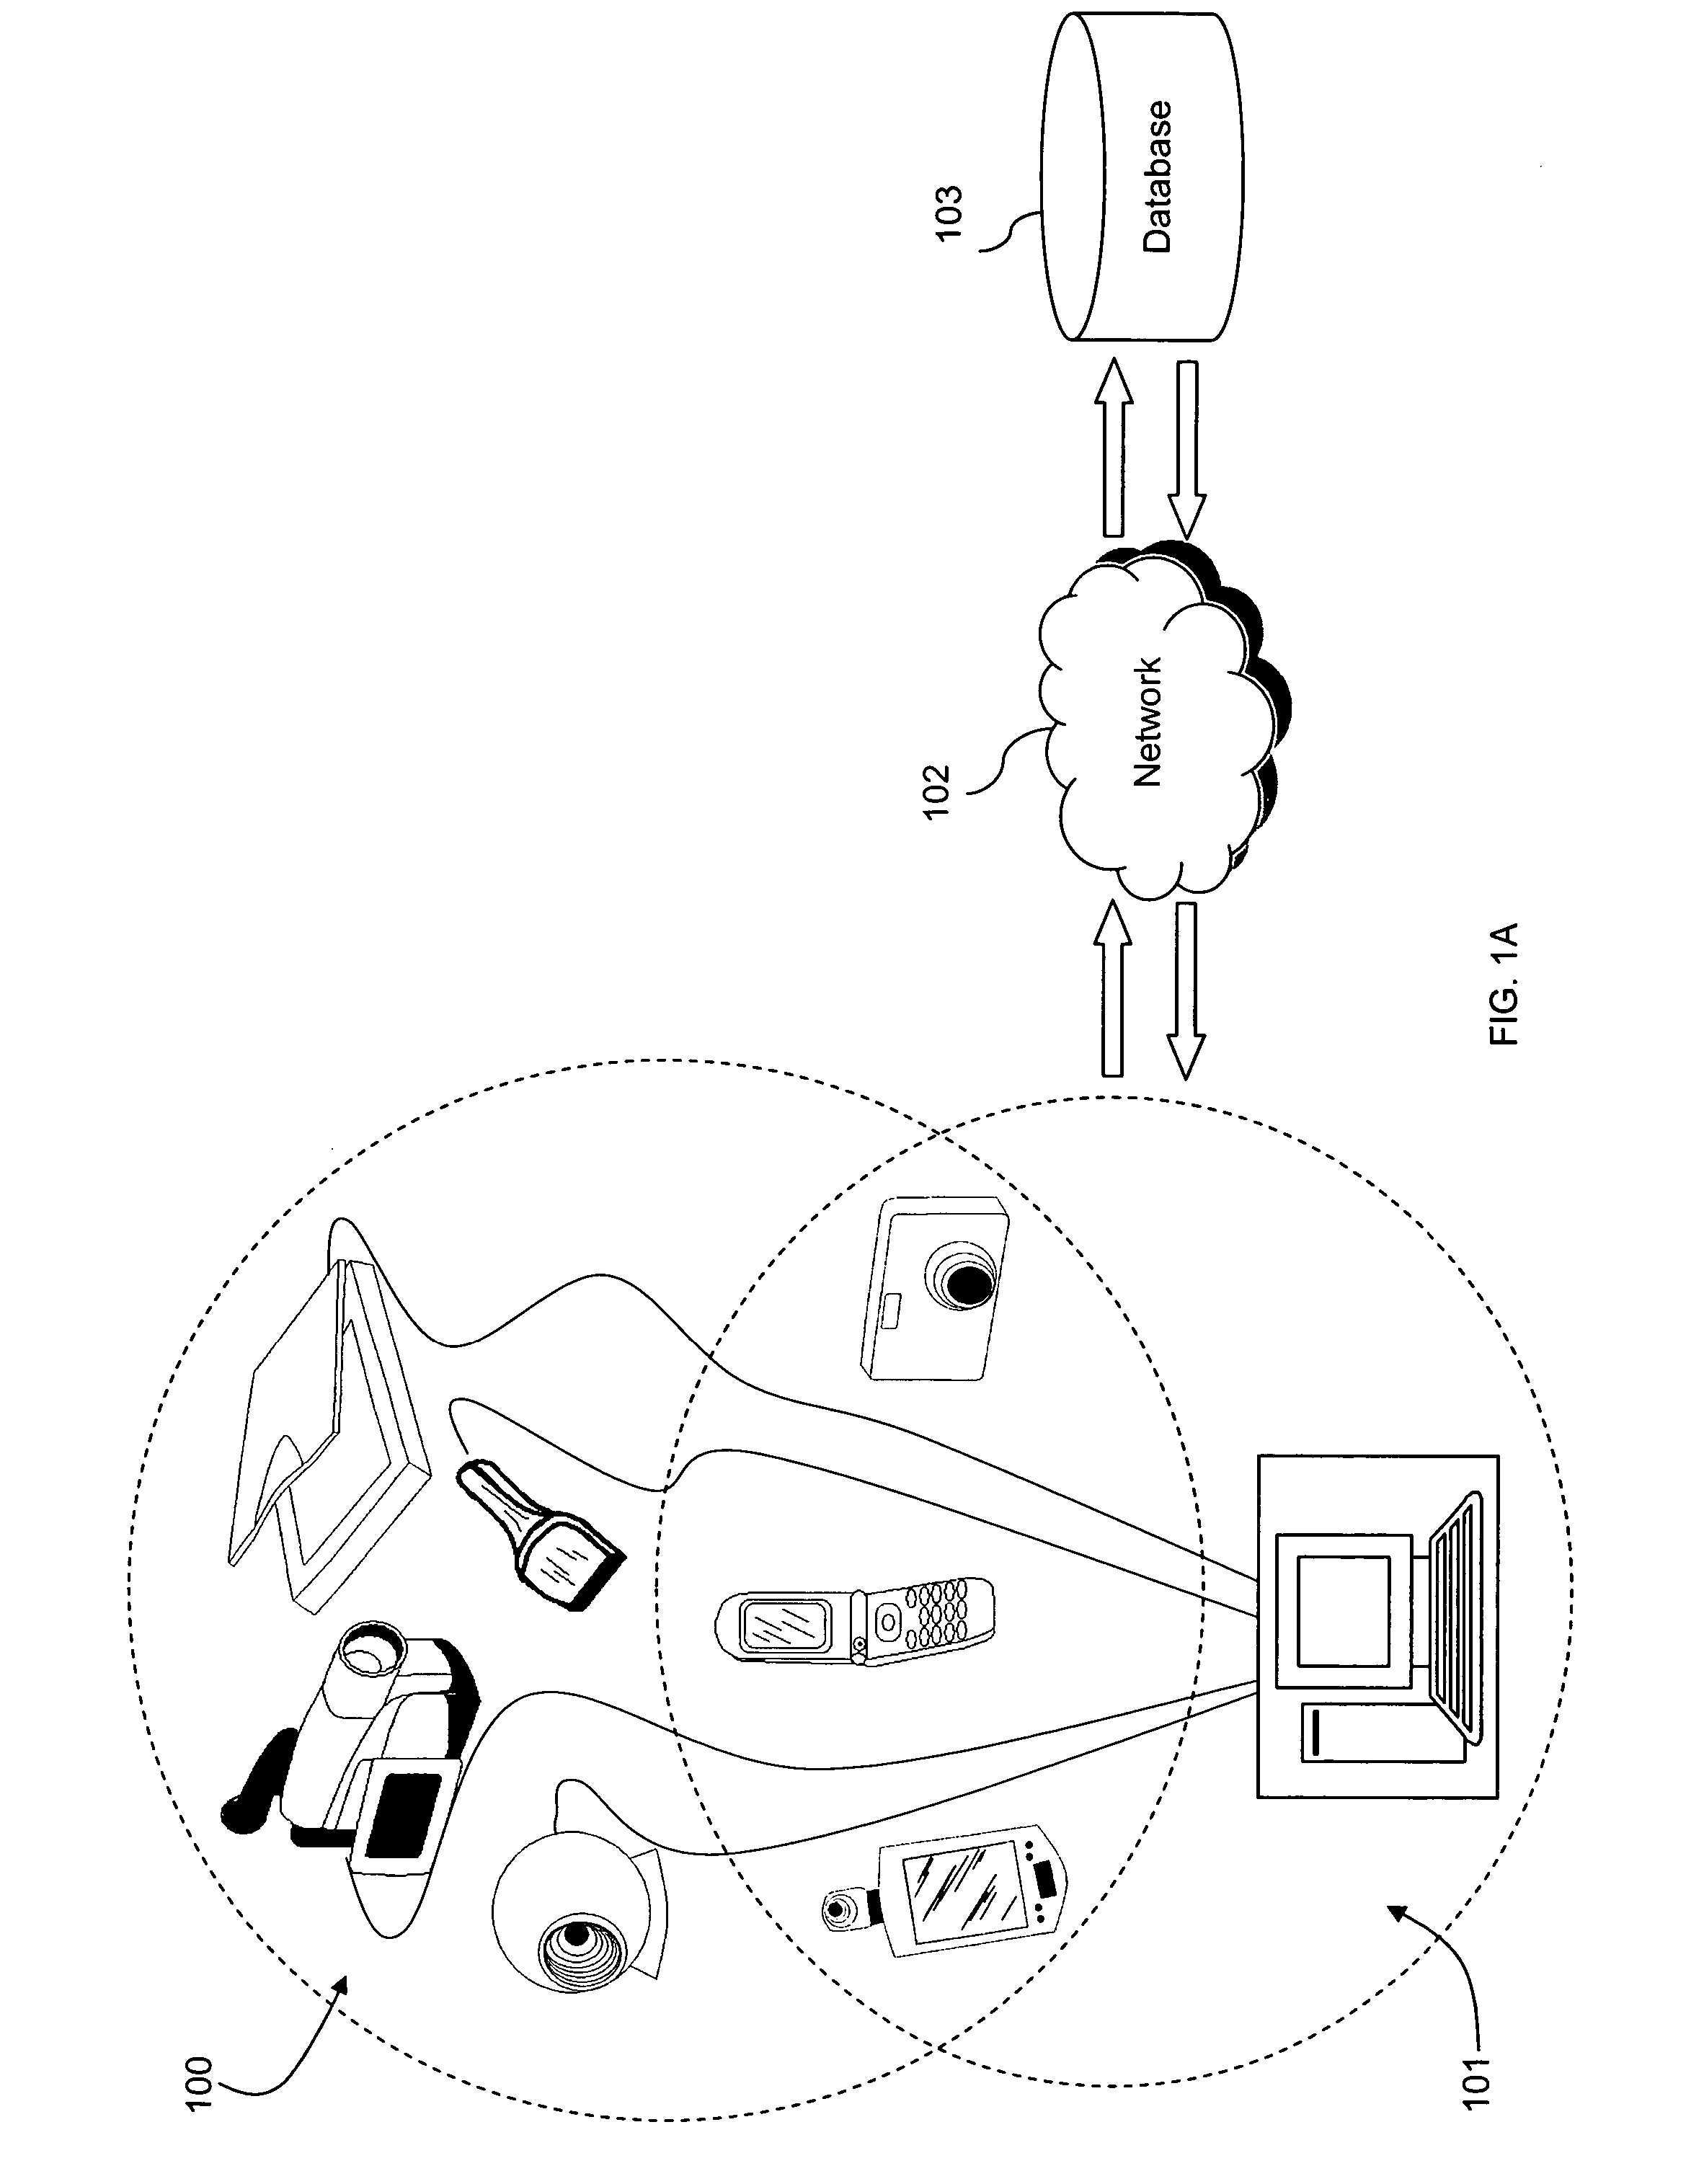 System and method for accessing electronic data via an image search engine